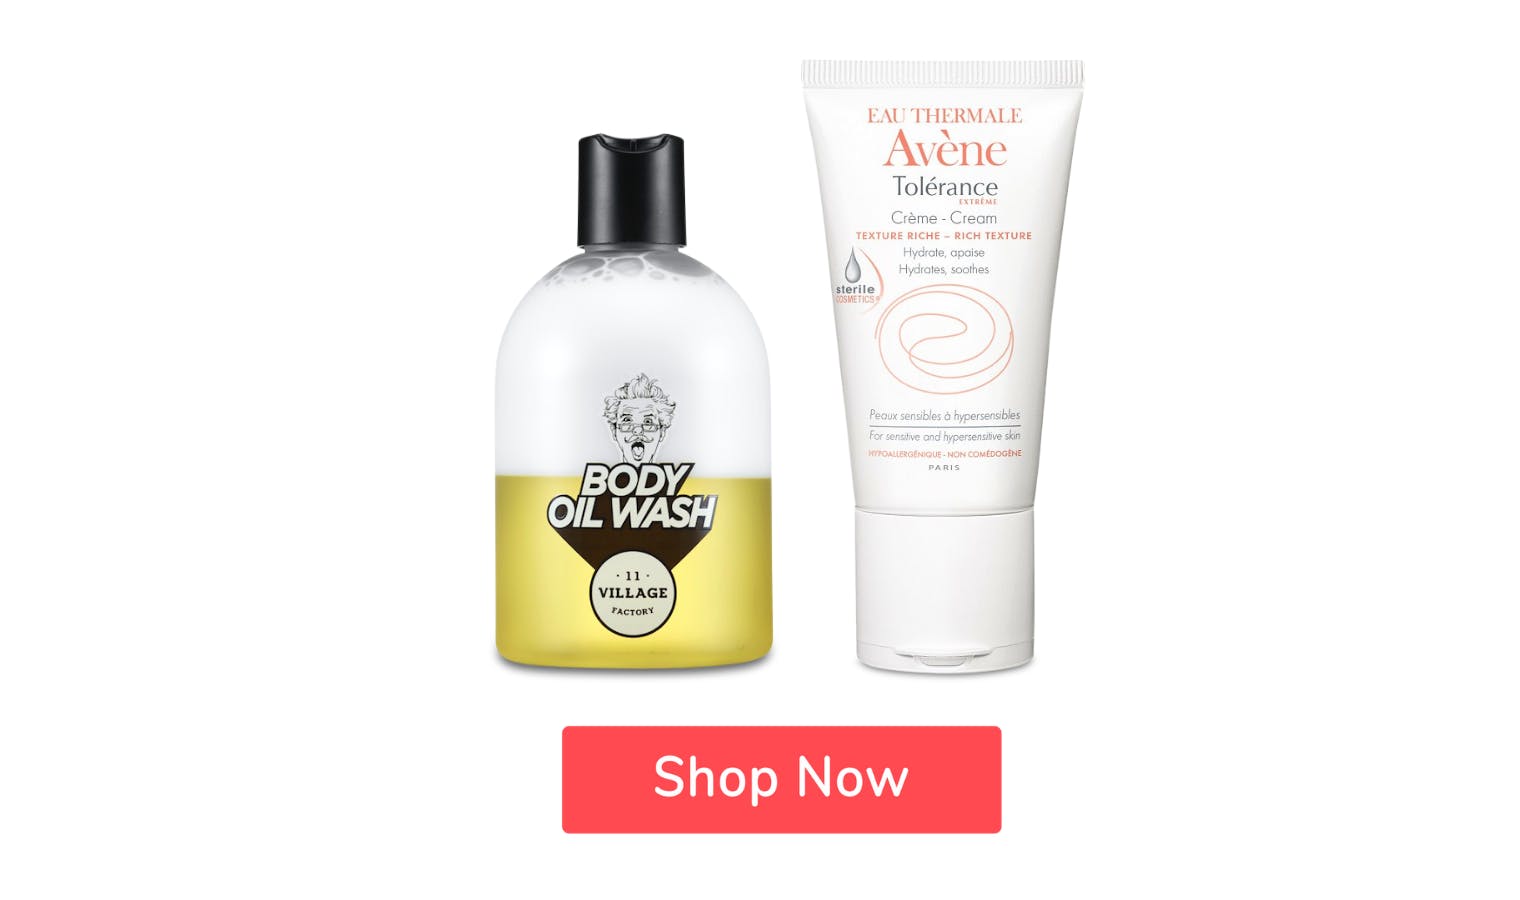 avene moisturiser and 11 village body wash with a button saying ‘shop now’